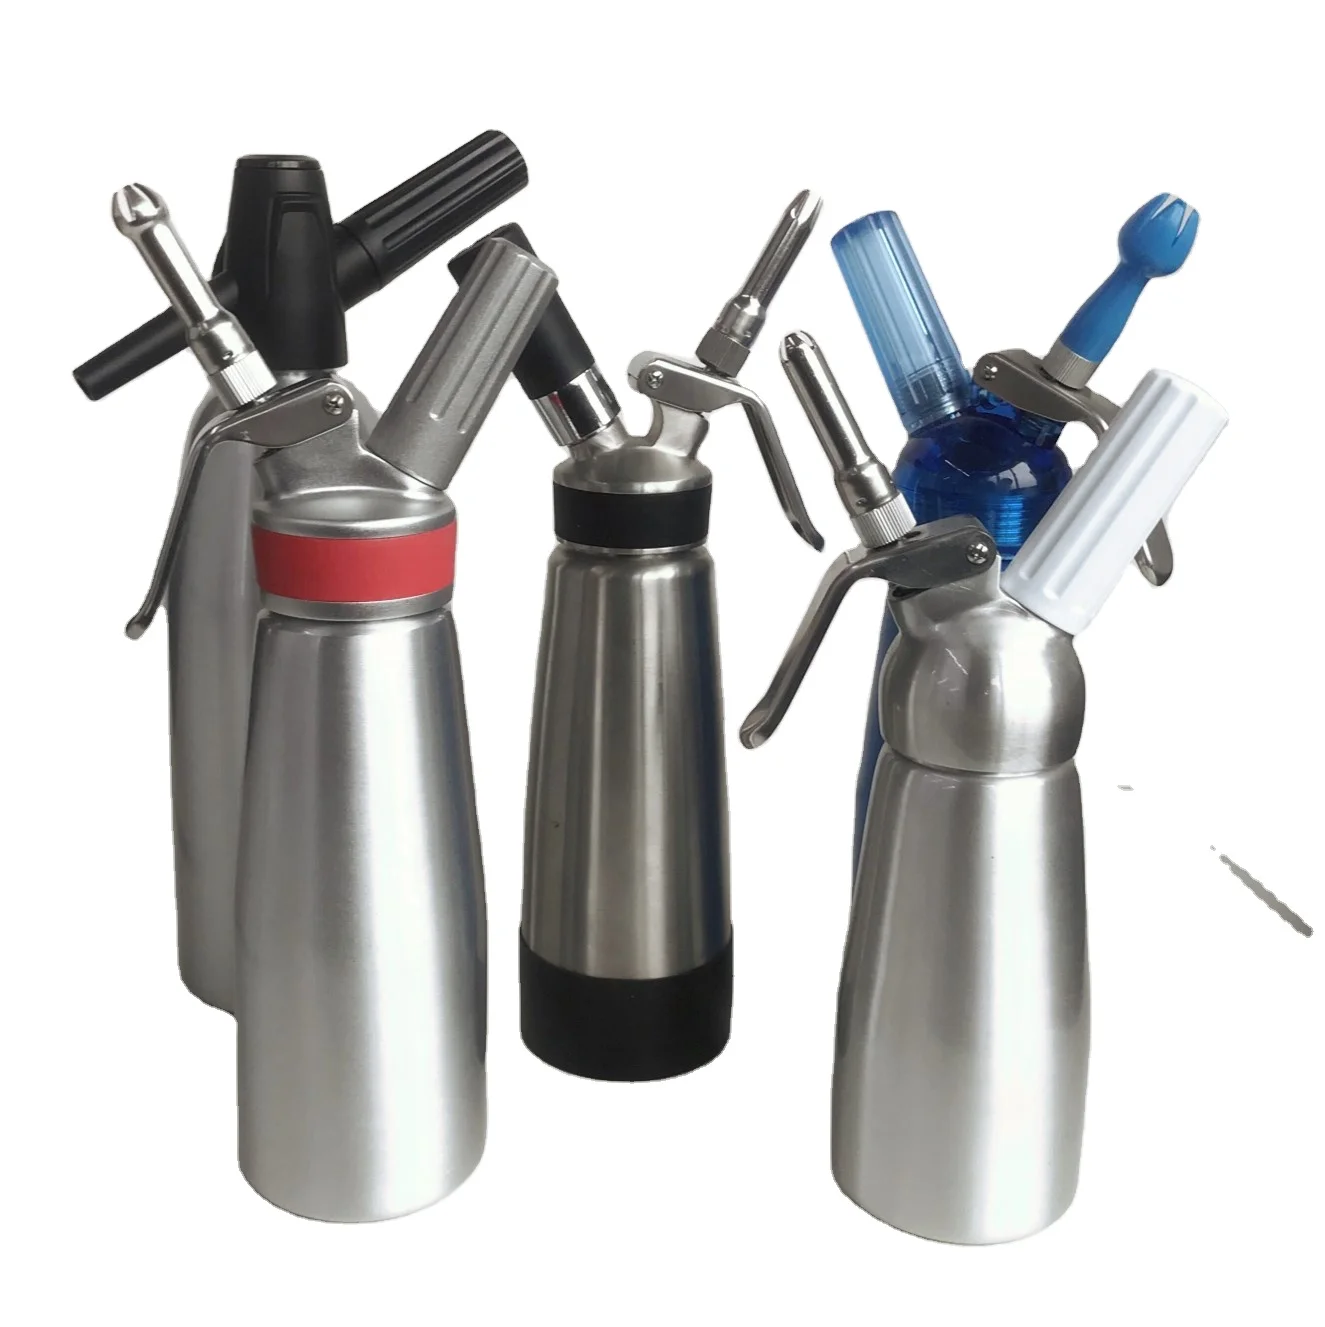 Cheap Factory Price Whipped Cream Dispenser 1 Pint Chargers Nitrous Oxide  N2o Siphon For - Buy Whipped Cream Dispenser 1 Pint,Whipped Cream Chargers  Nitrous Oxide N2o,Siphon For Cream Product on Alibaba.com